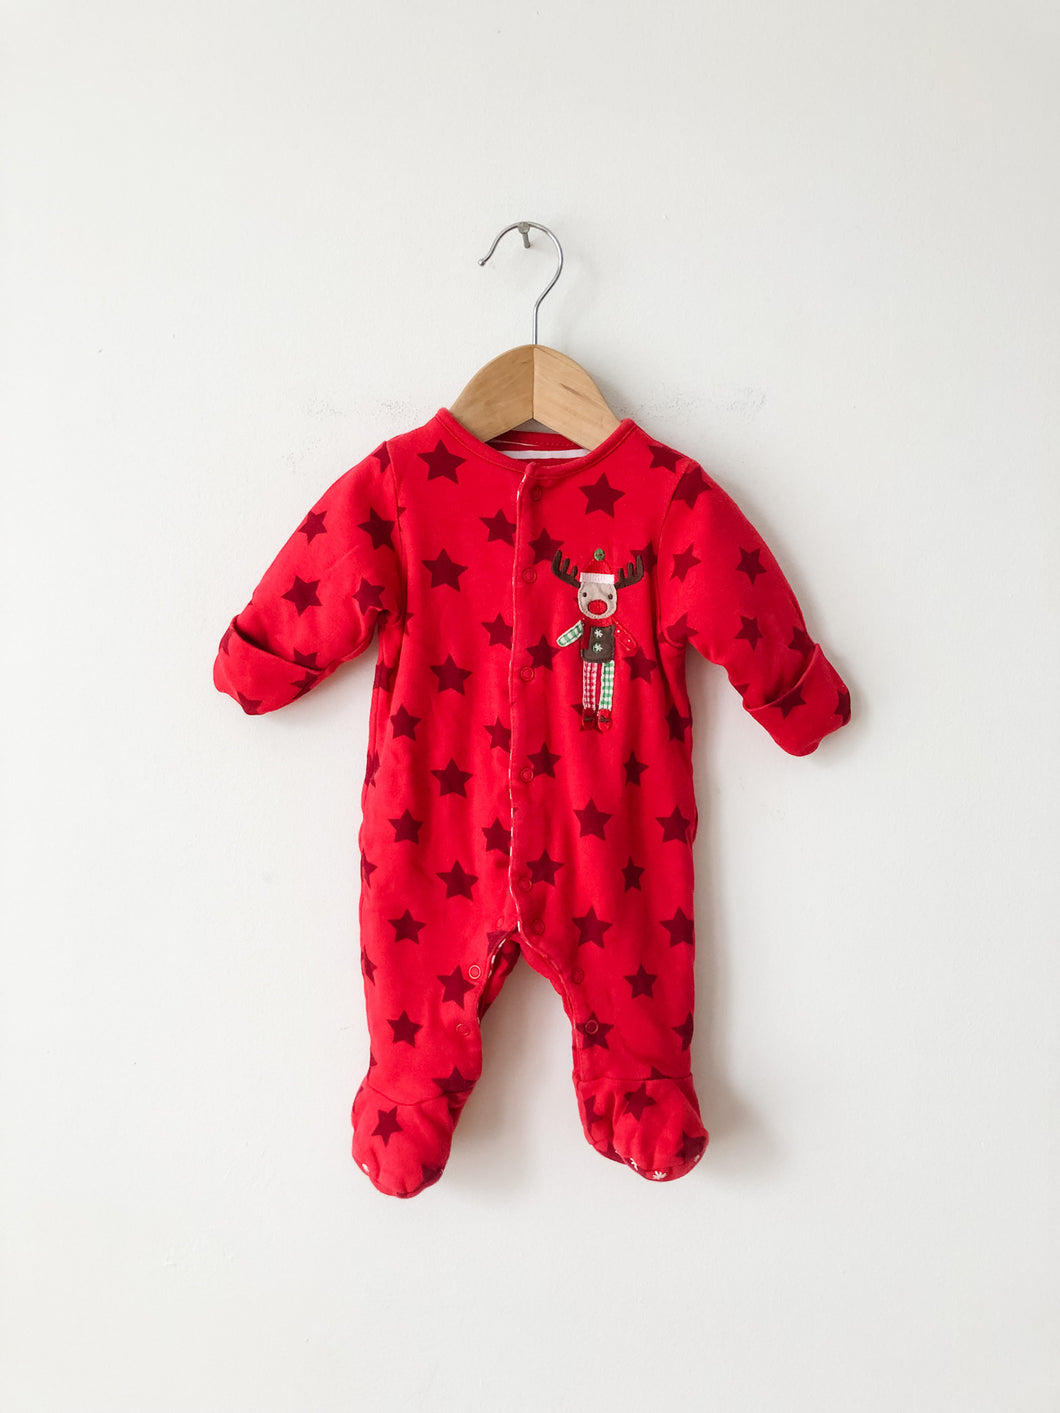 Kids Mothercare Holiday Sleeper Size 0-3 Months